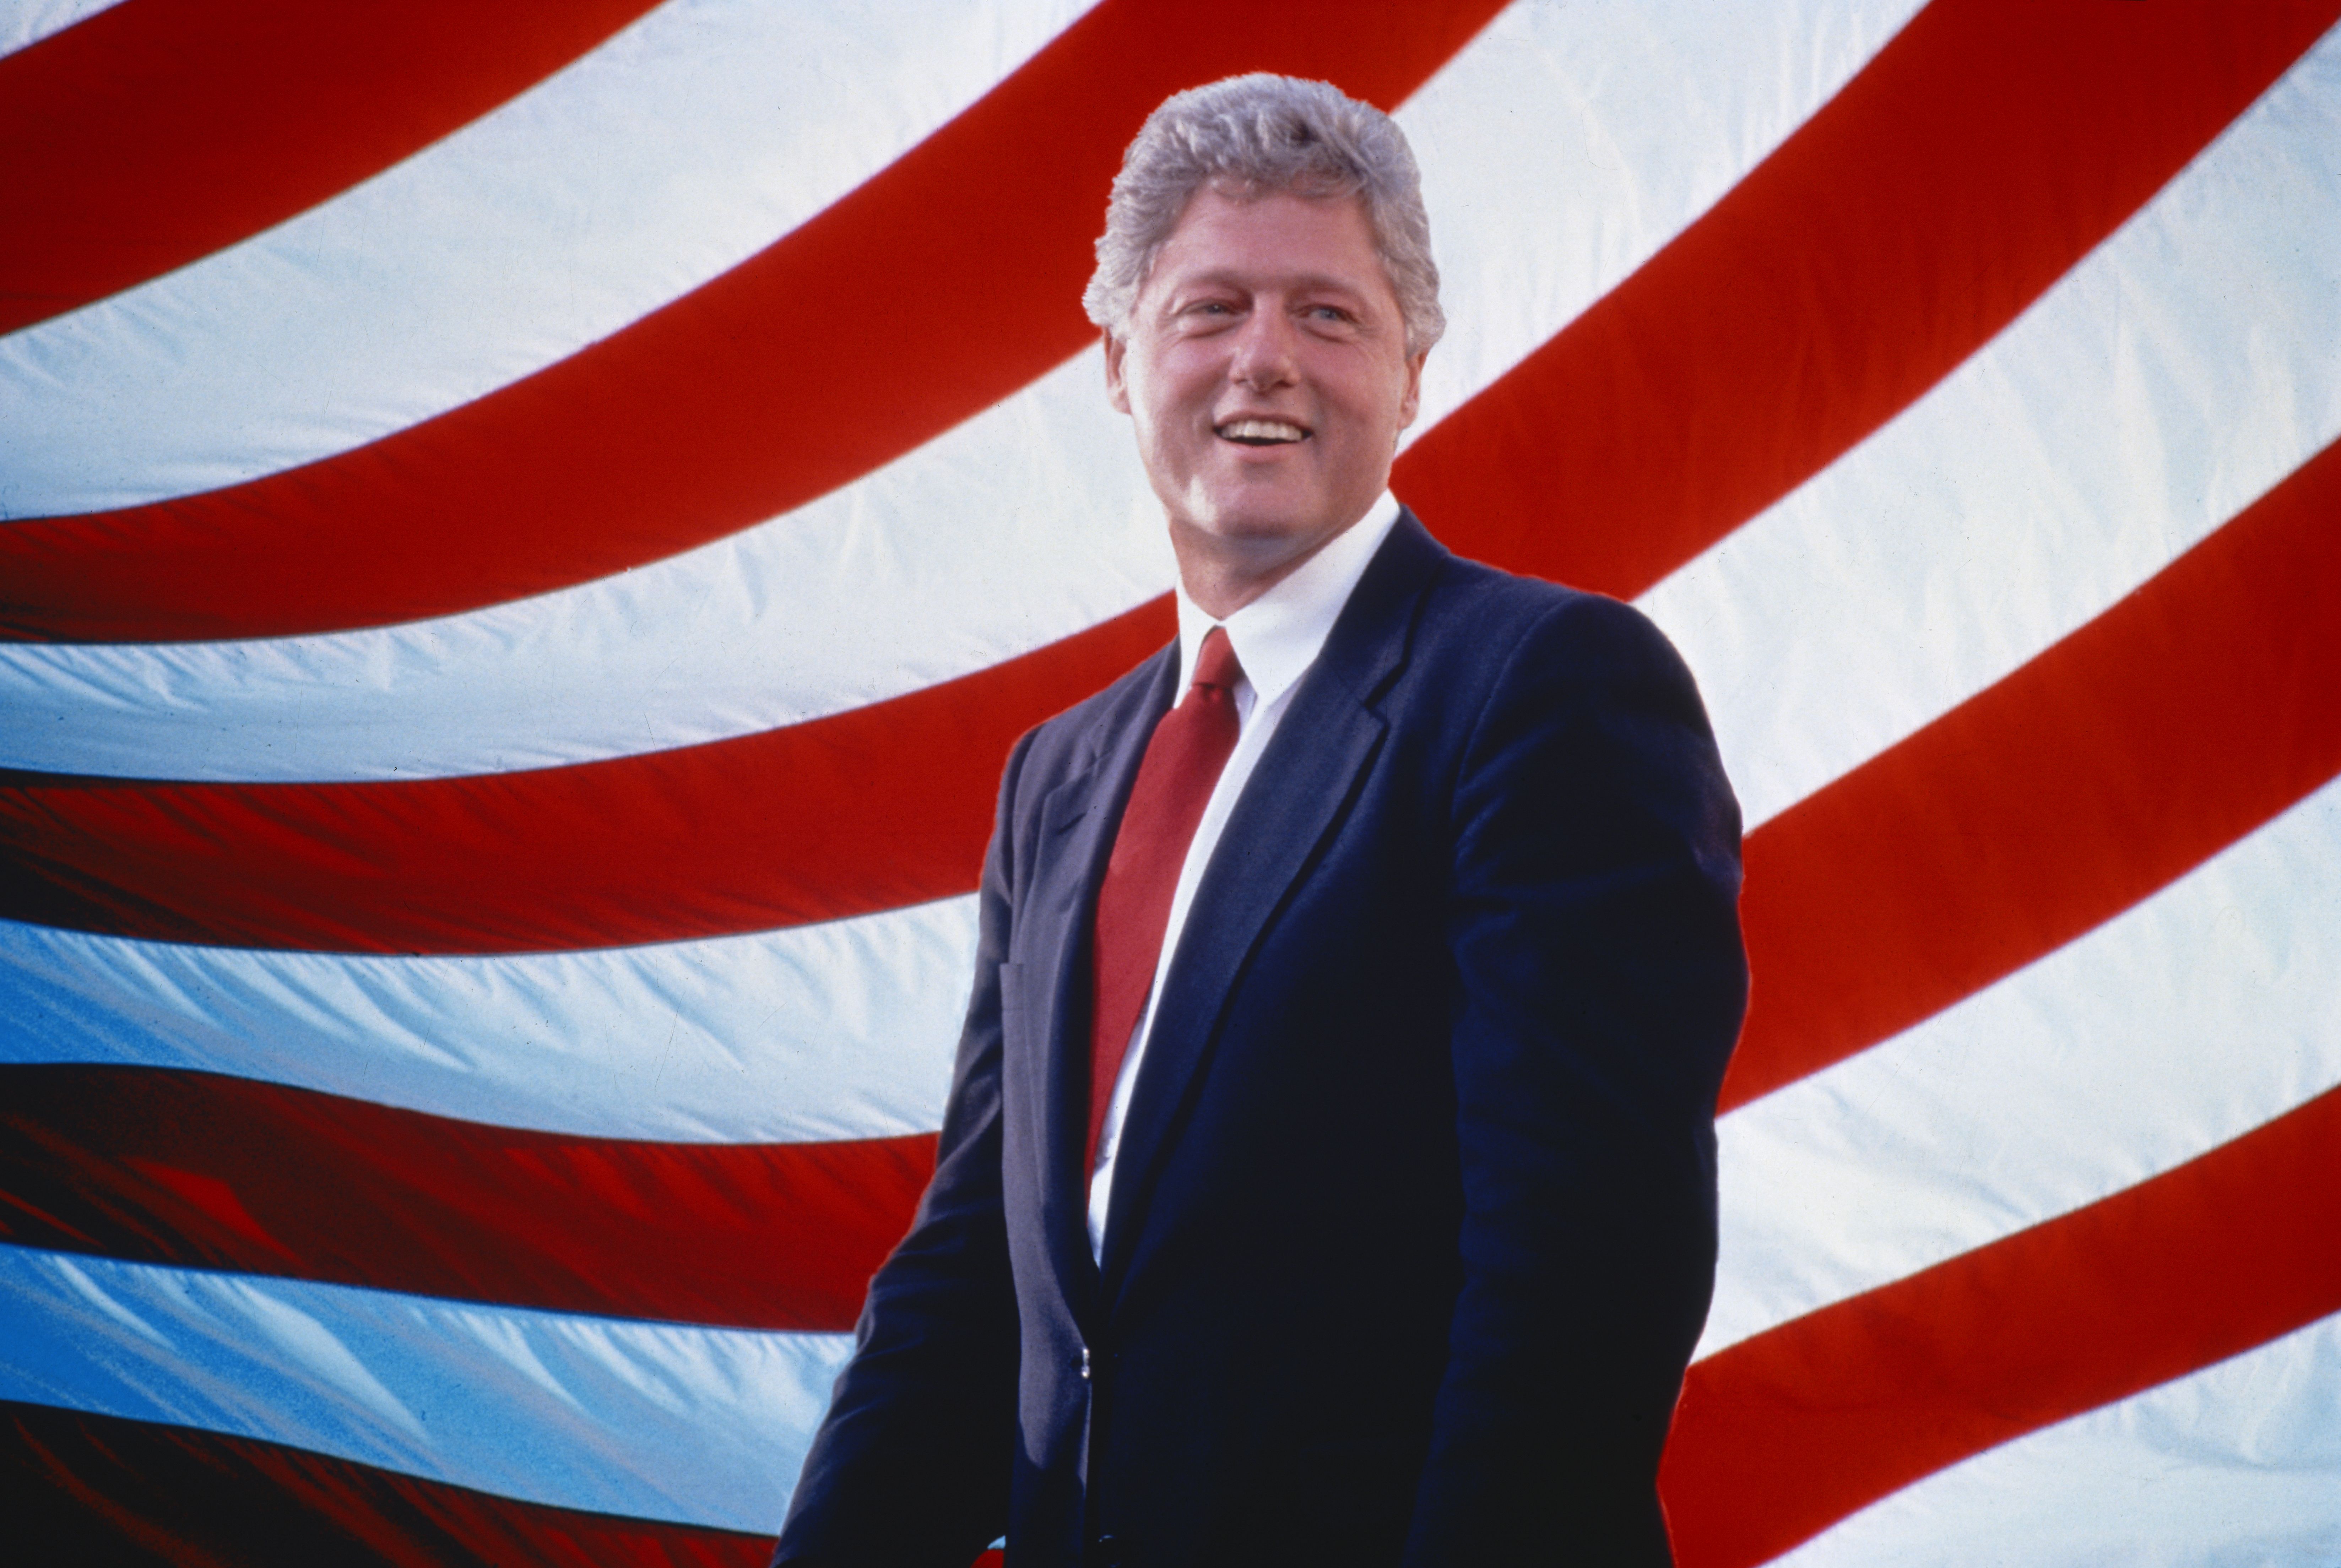 Bill Clinton stands in a blue suit in front of the American flag.